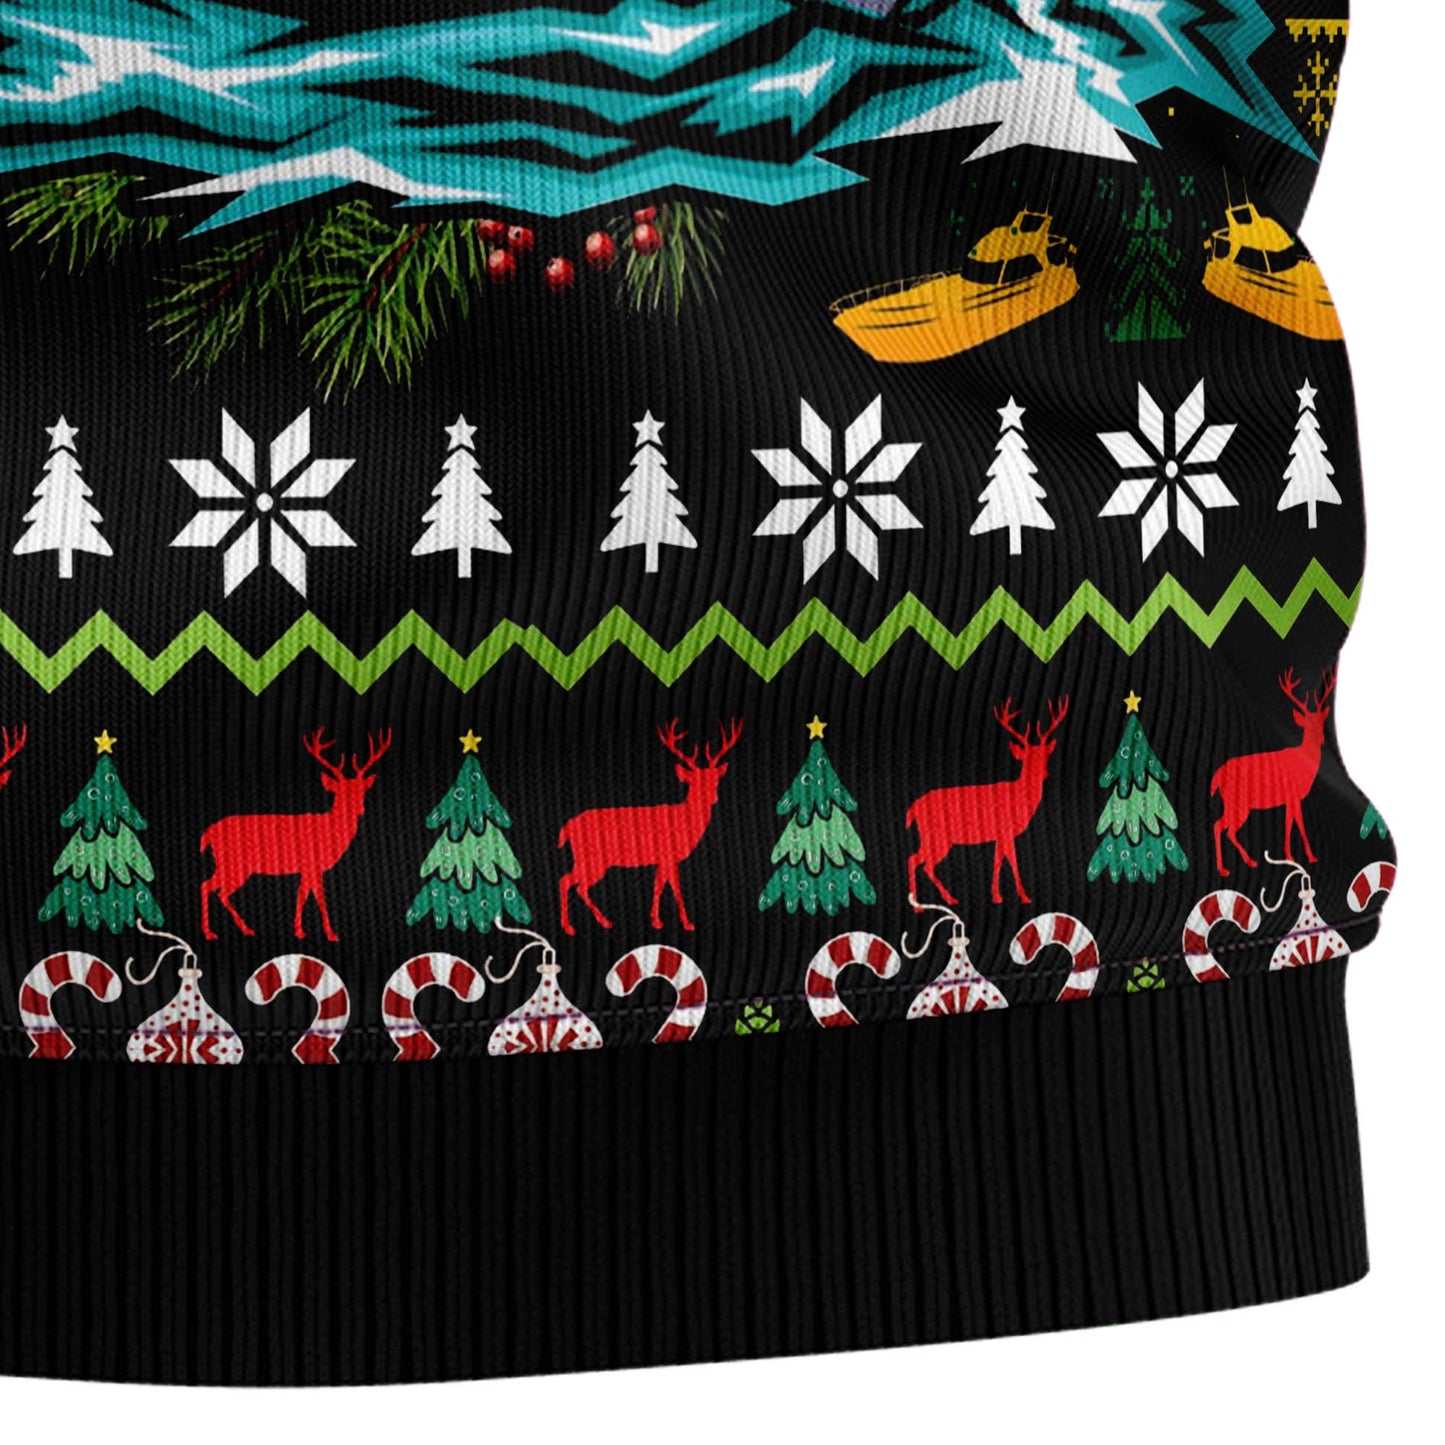 I'm On A Boat HT091206 Ugly Christmas Sweater